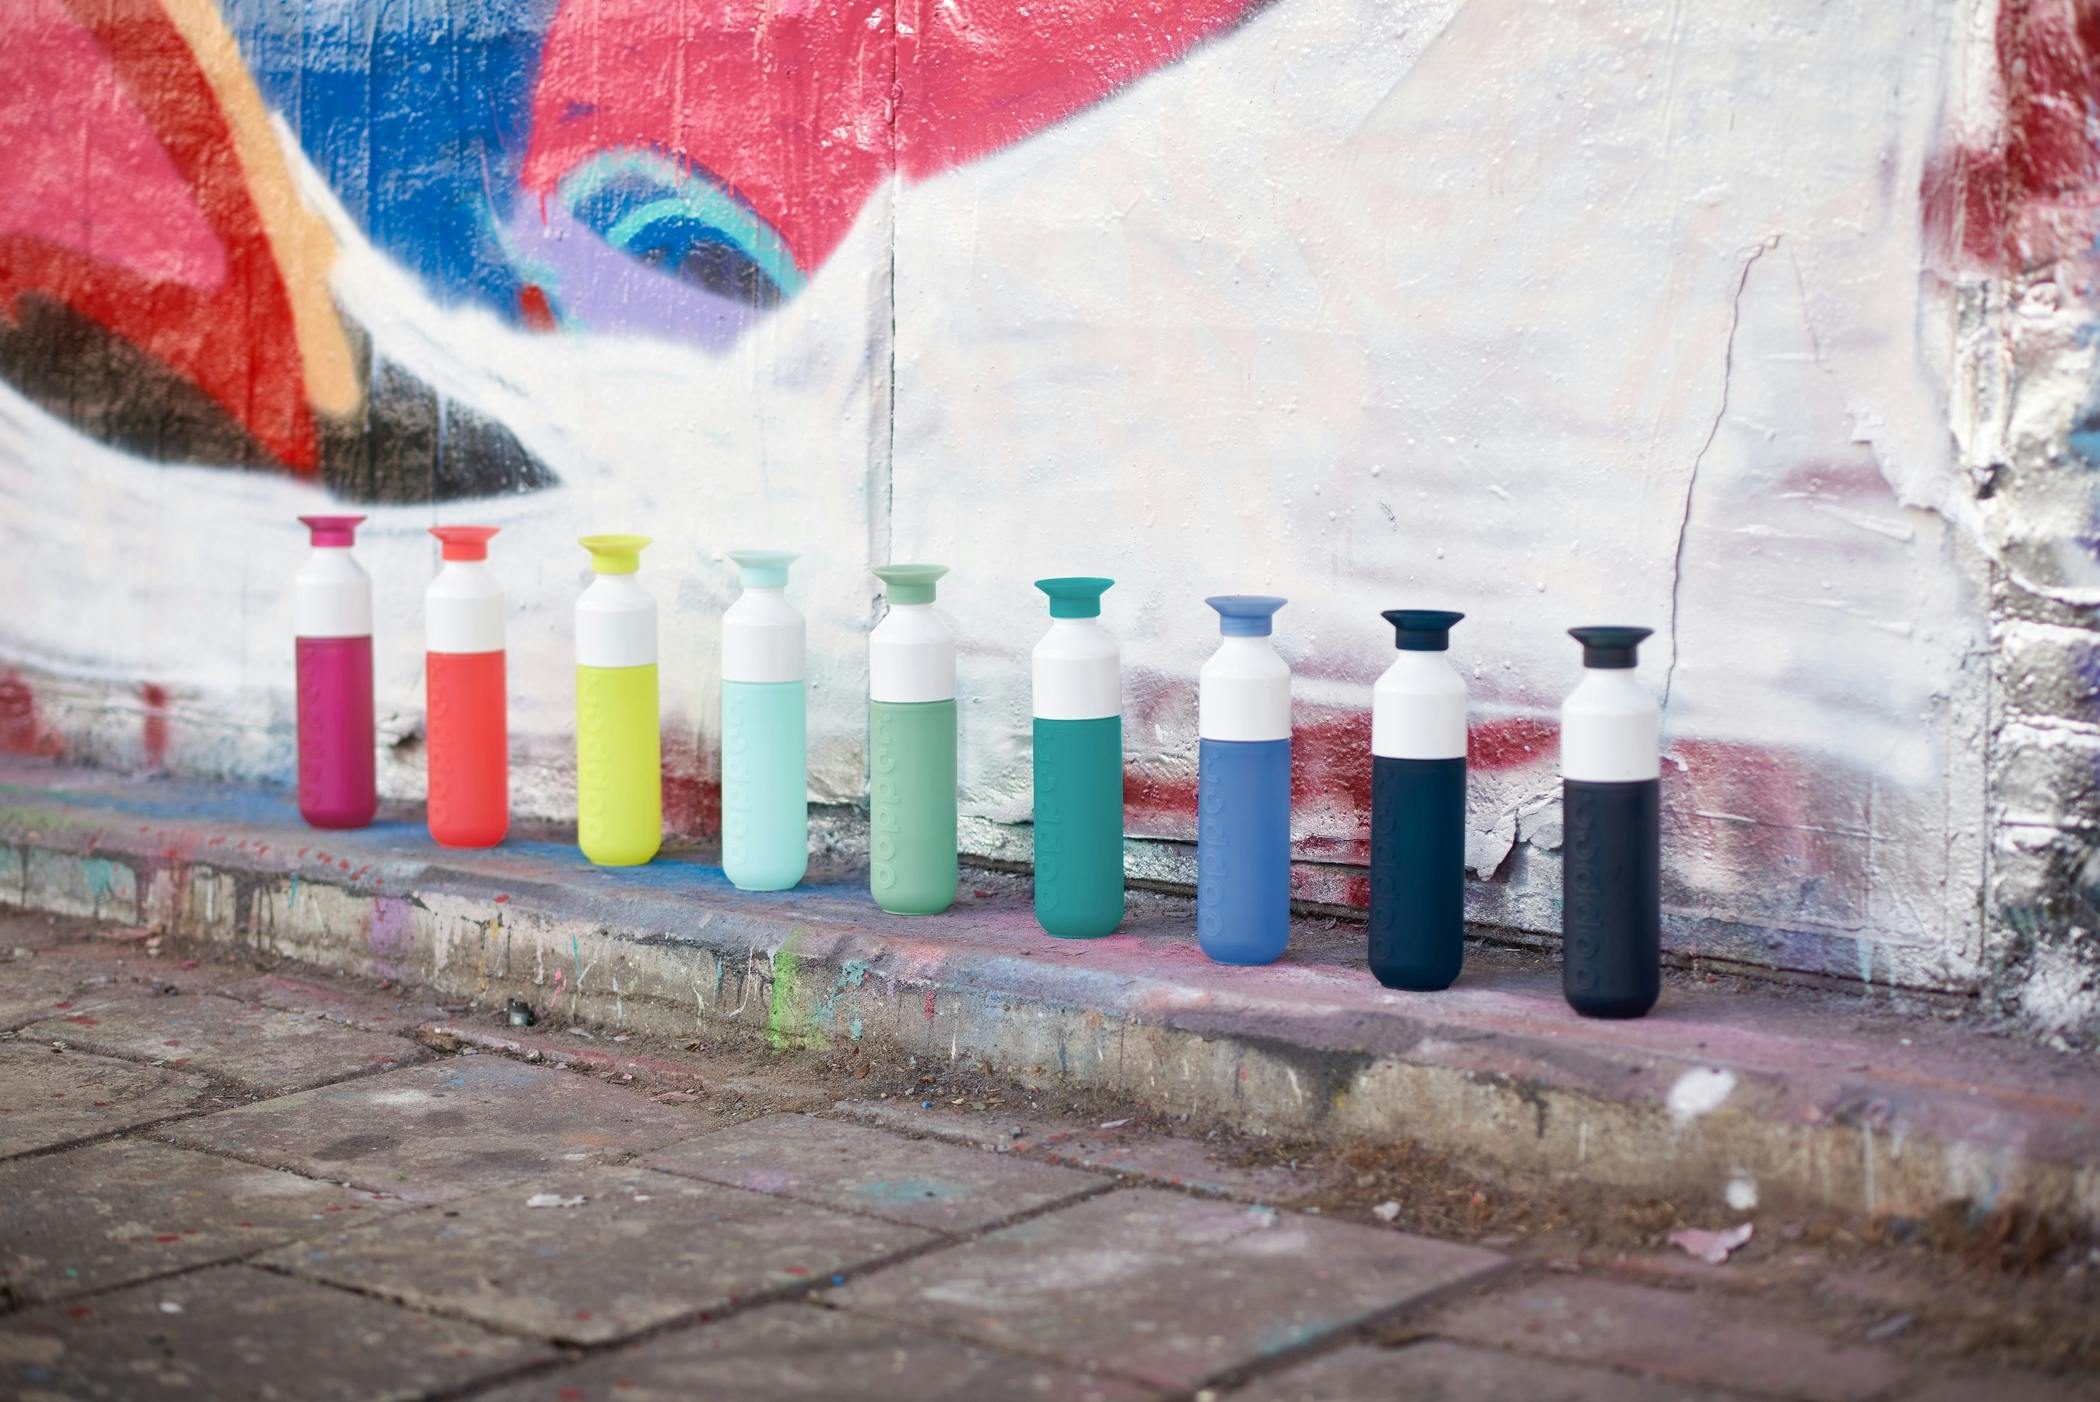 Line up of 9 colourful Dopper Original bottles in front of graffiti